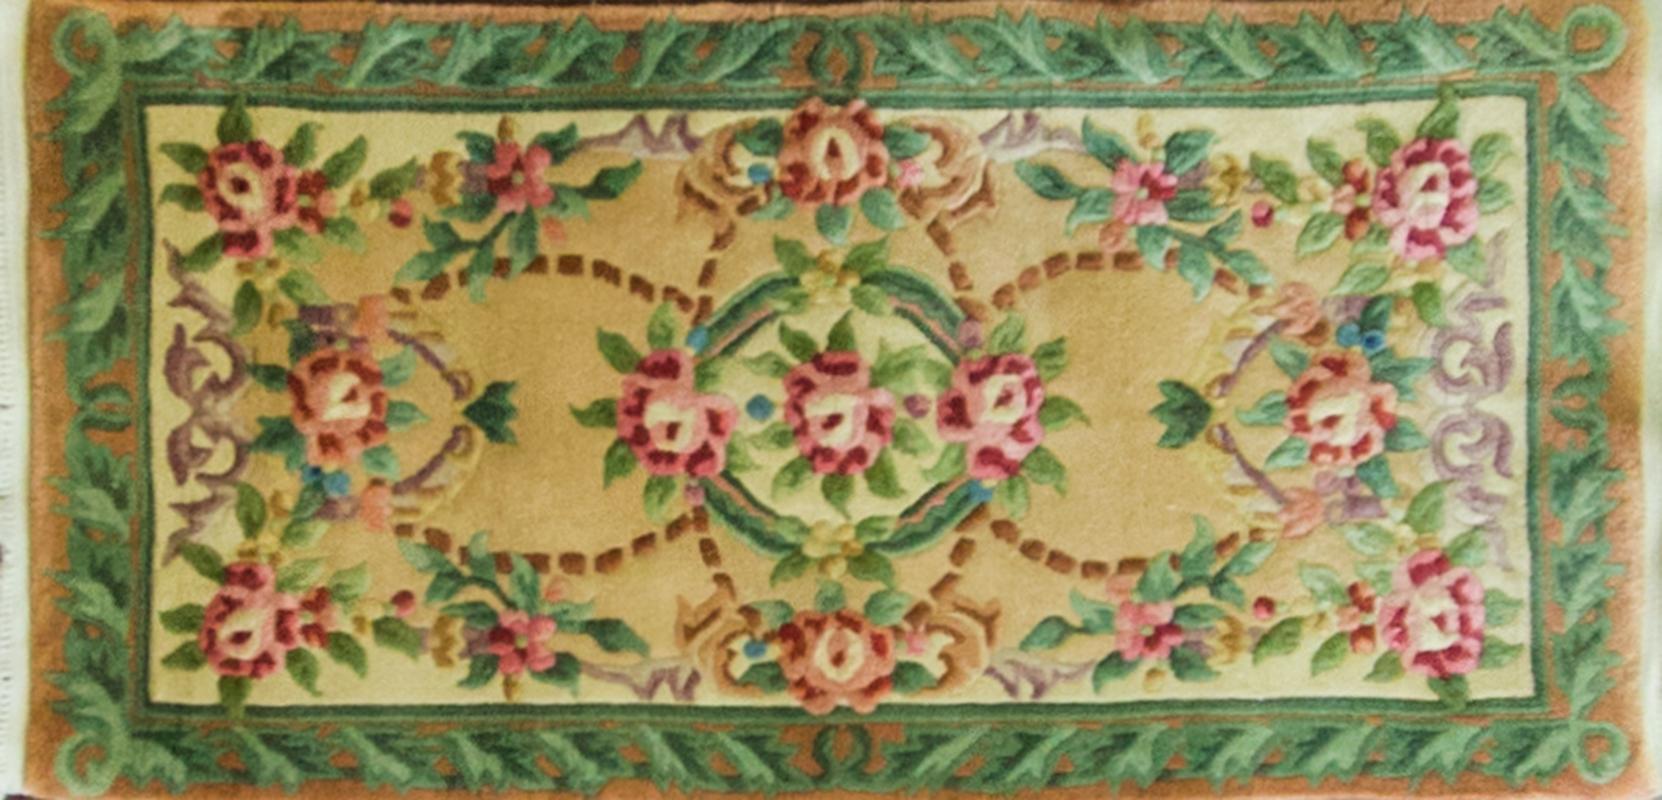 This wonderful Art Deco carpet was made in China, circa 1900s or 1940s. Walter Nichols was great American rug producer (the Art Deco rugs which he did not originate them) in Tientsin. The rugs made of wool and silk with bold vibrant colors and the